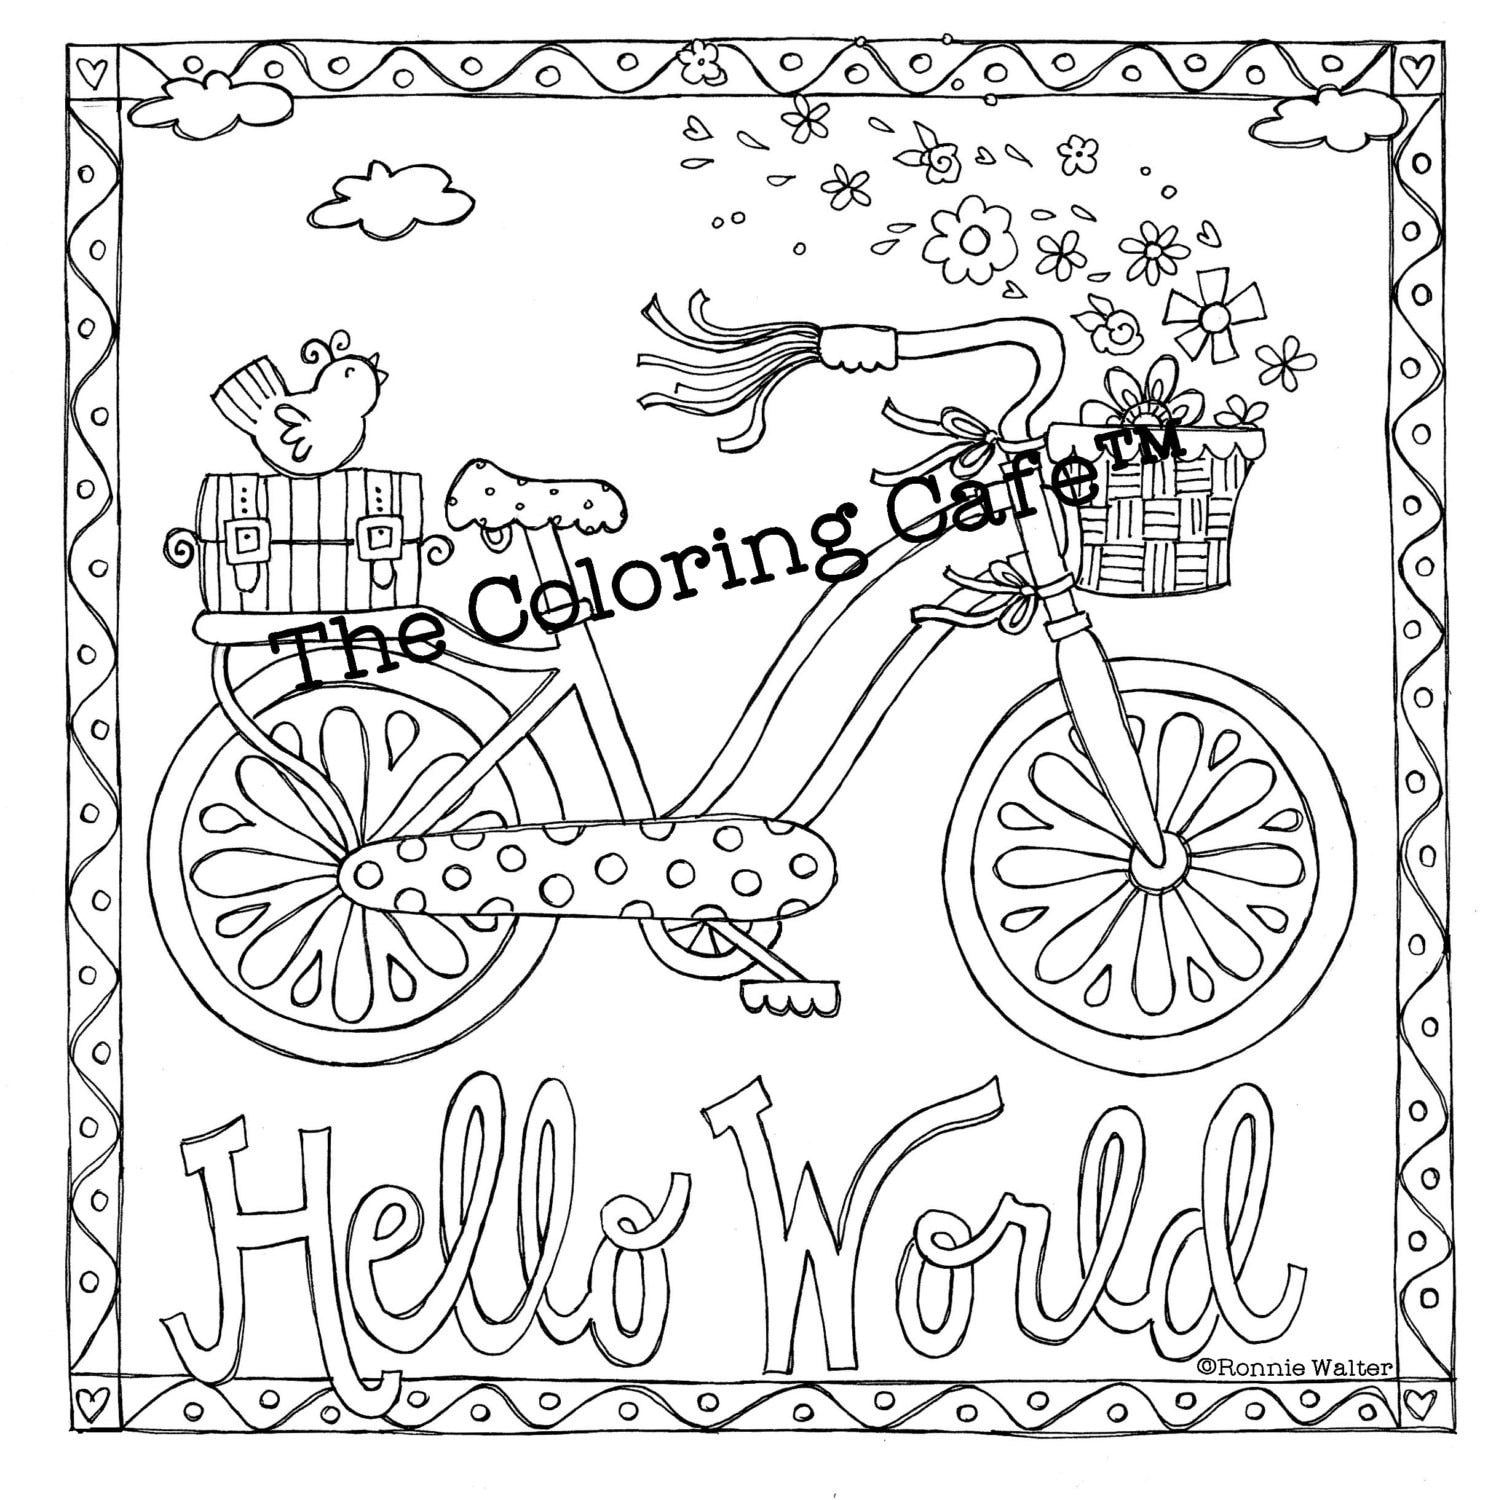 Download Coloring Cafe Coloring Book for Grown-Up Girls by Ronnie